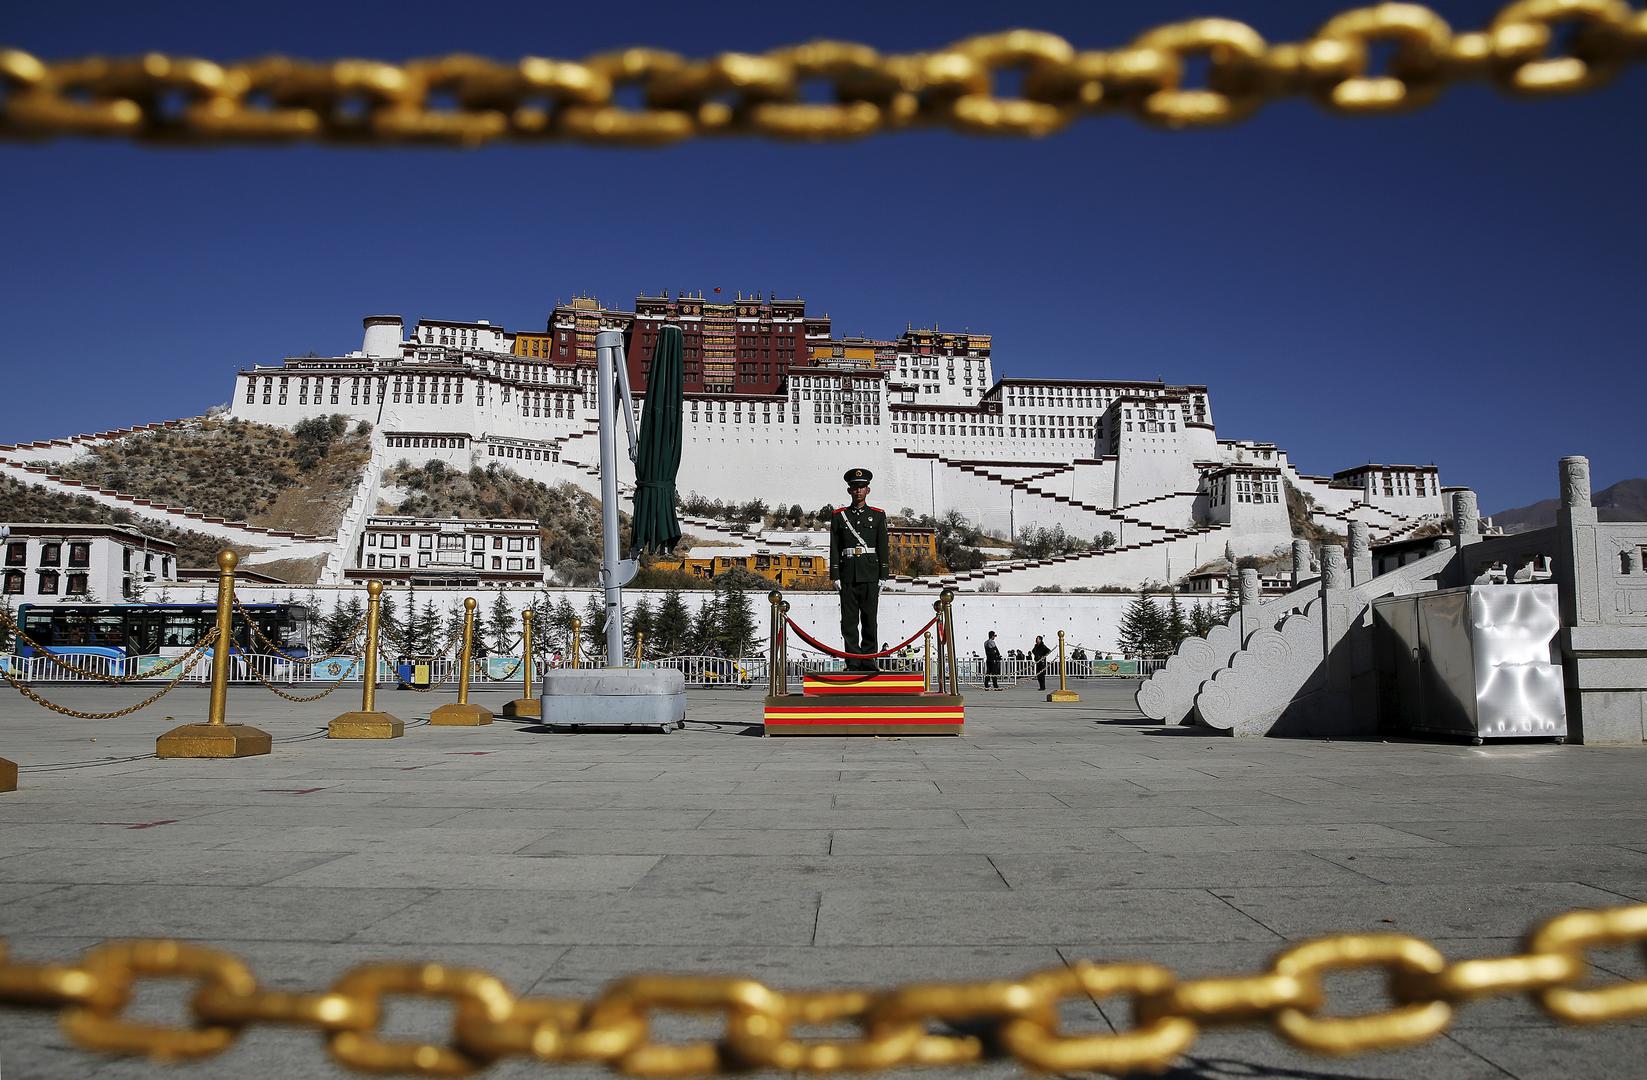 A paramilitary police officer stands guard in front of the Potala Palace in Lhasa, Tibet Autonomous Region, China on November 17, 2015.